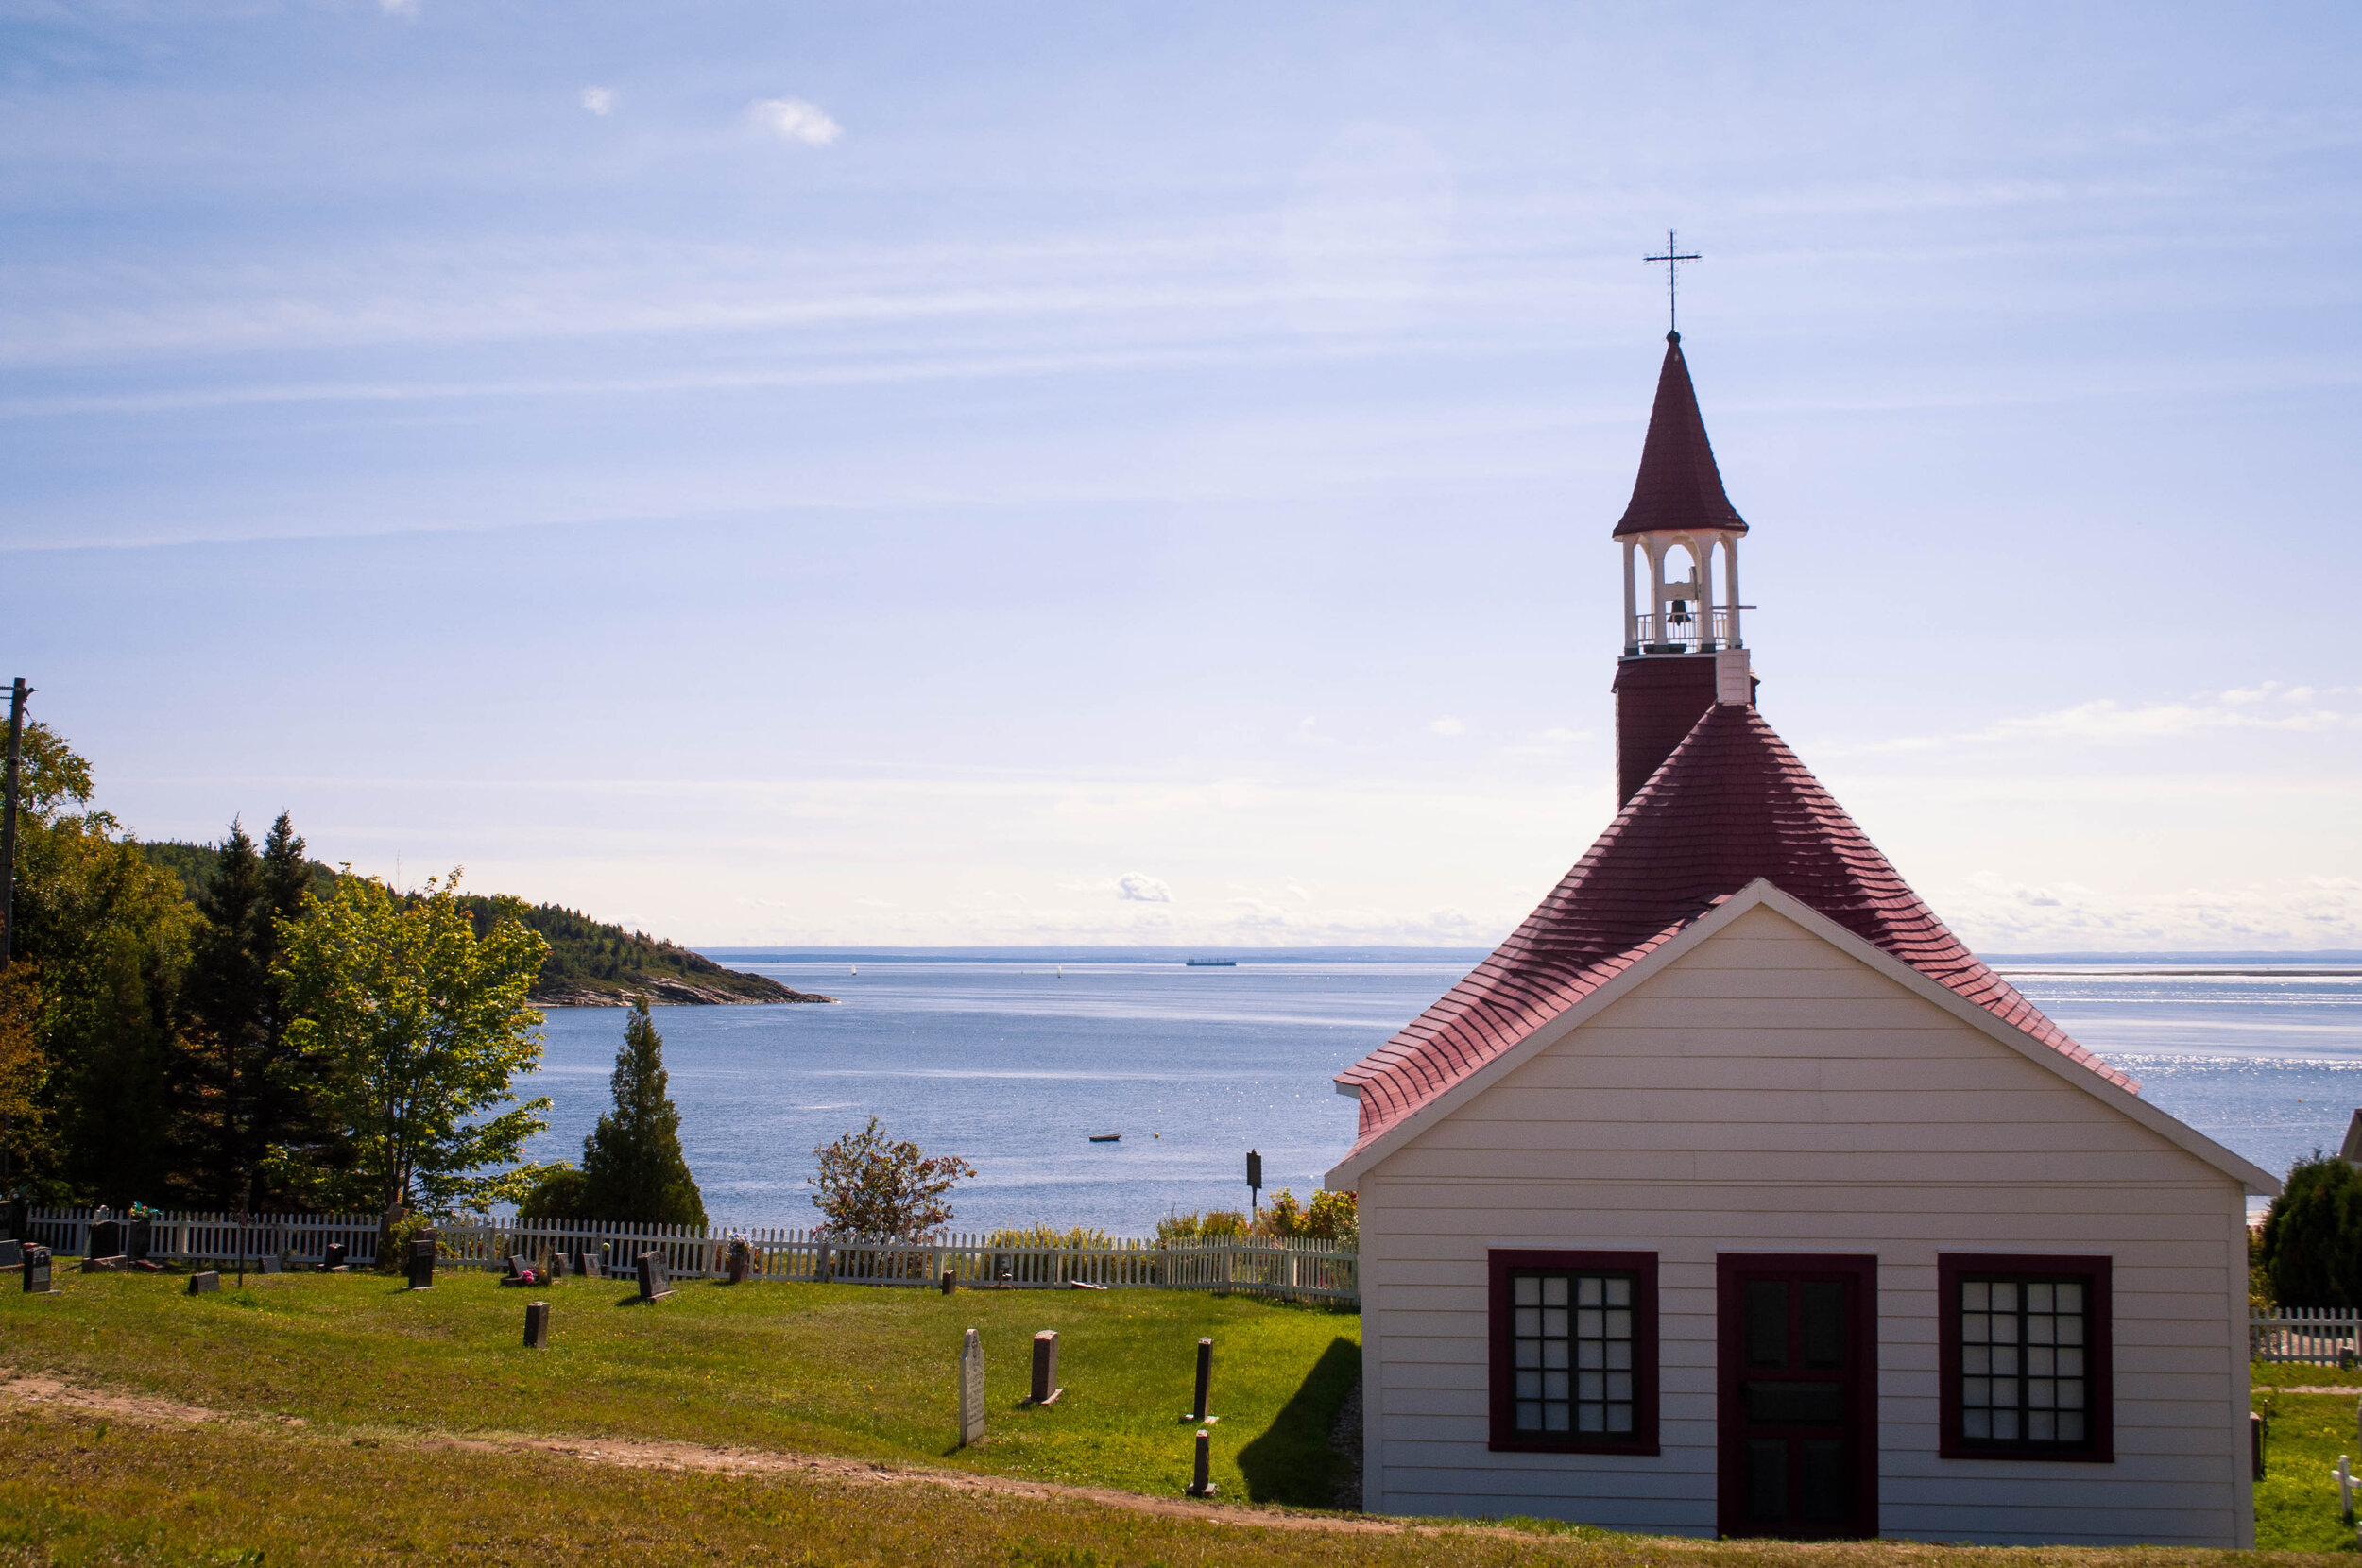 The "Indian chapel" in Tadoussac